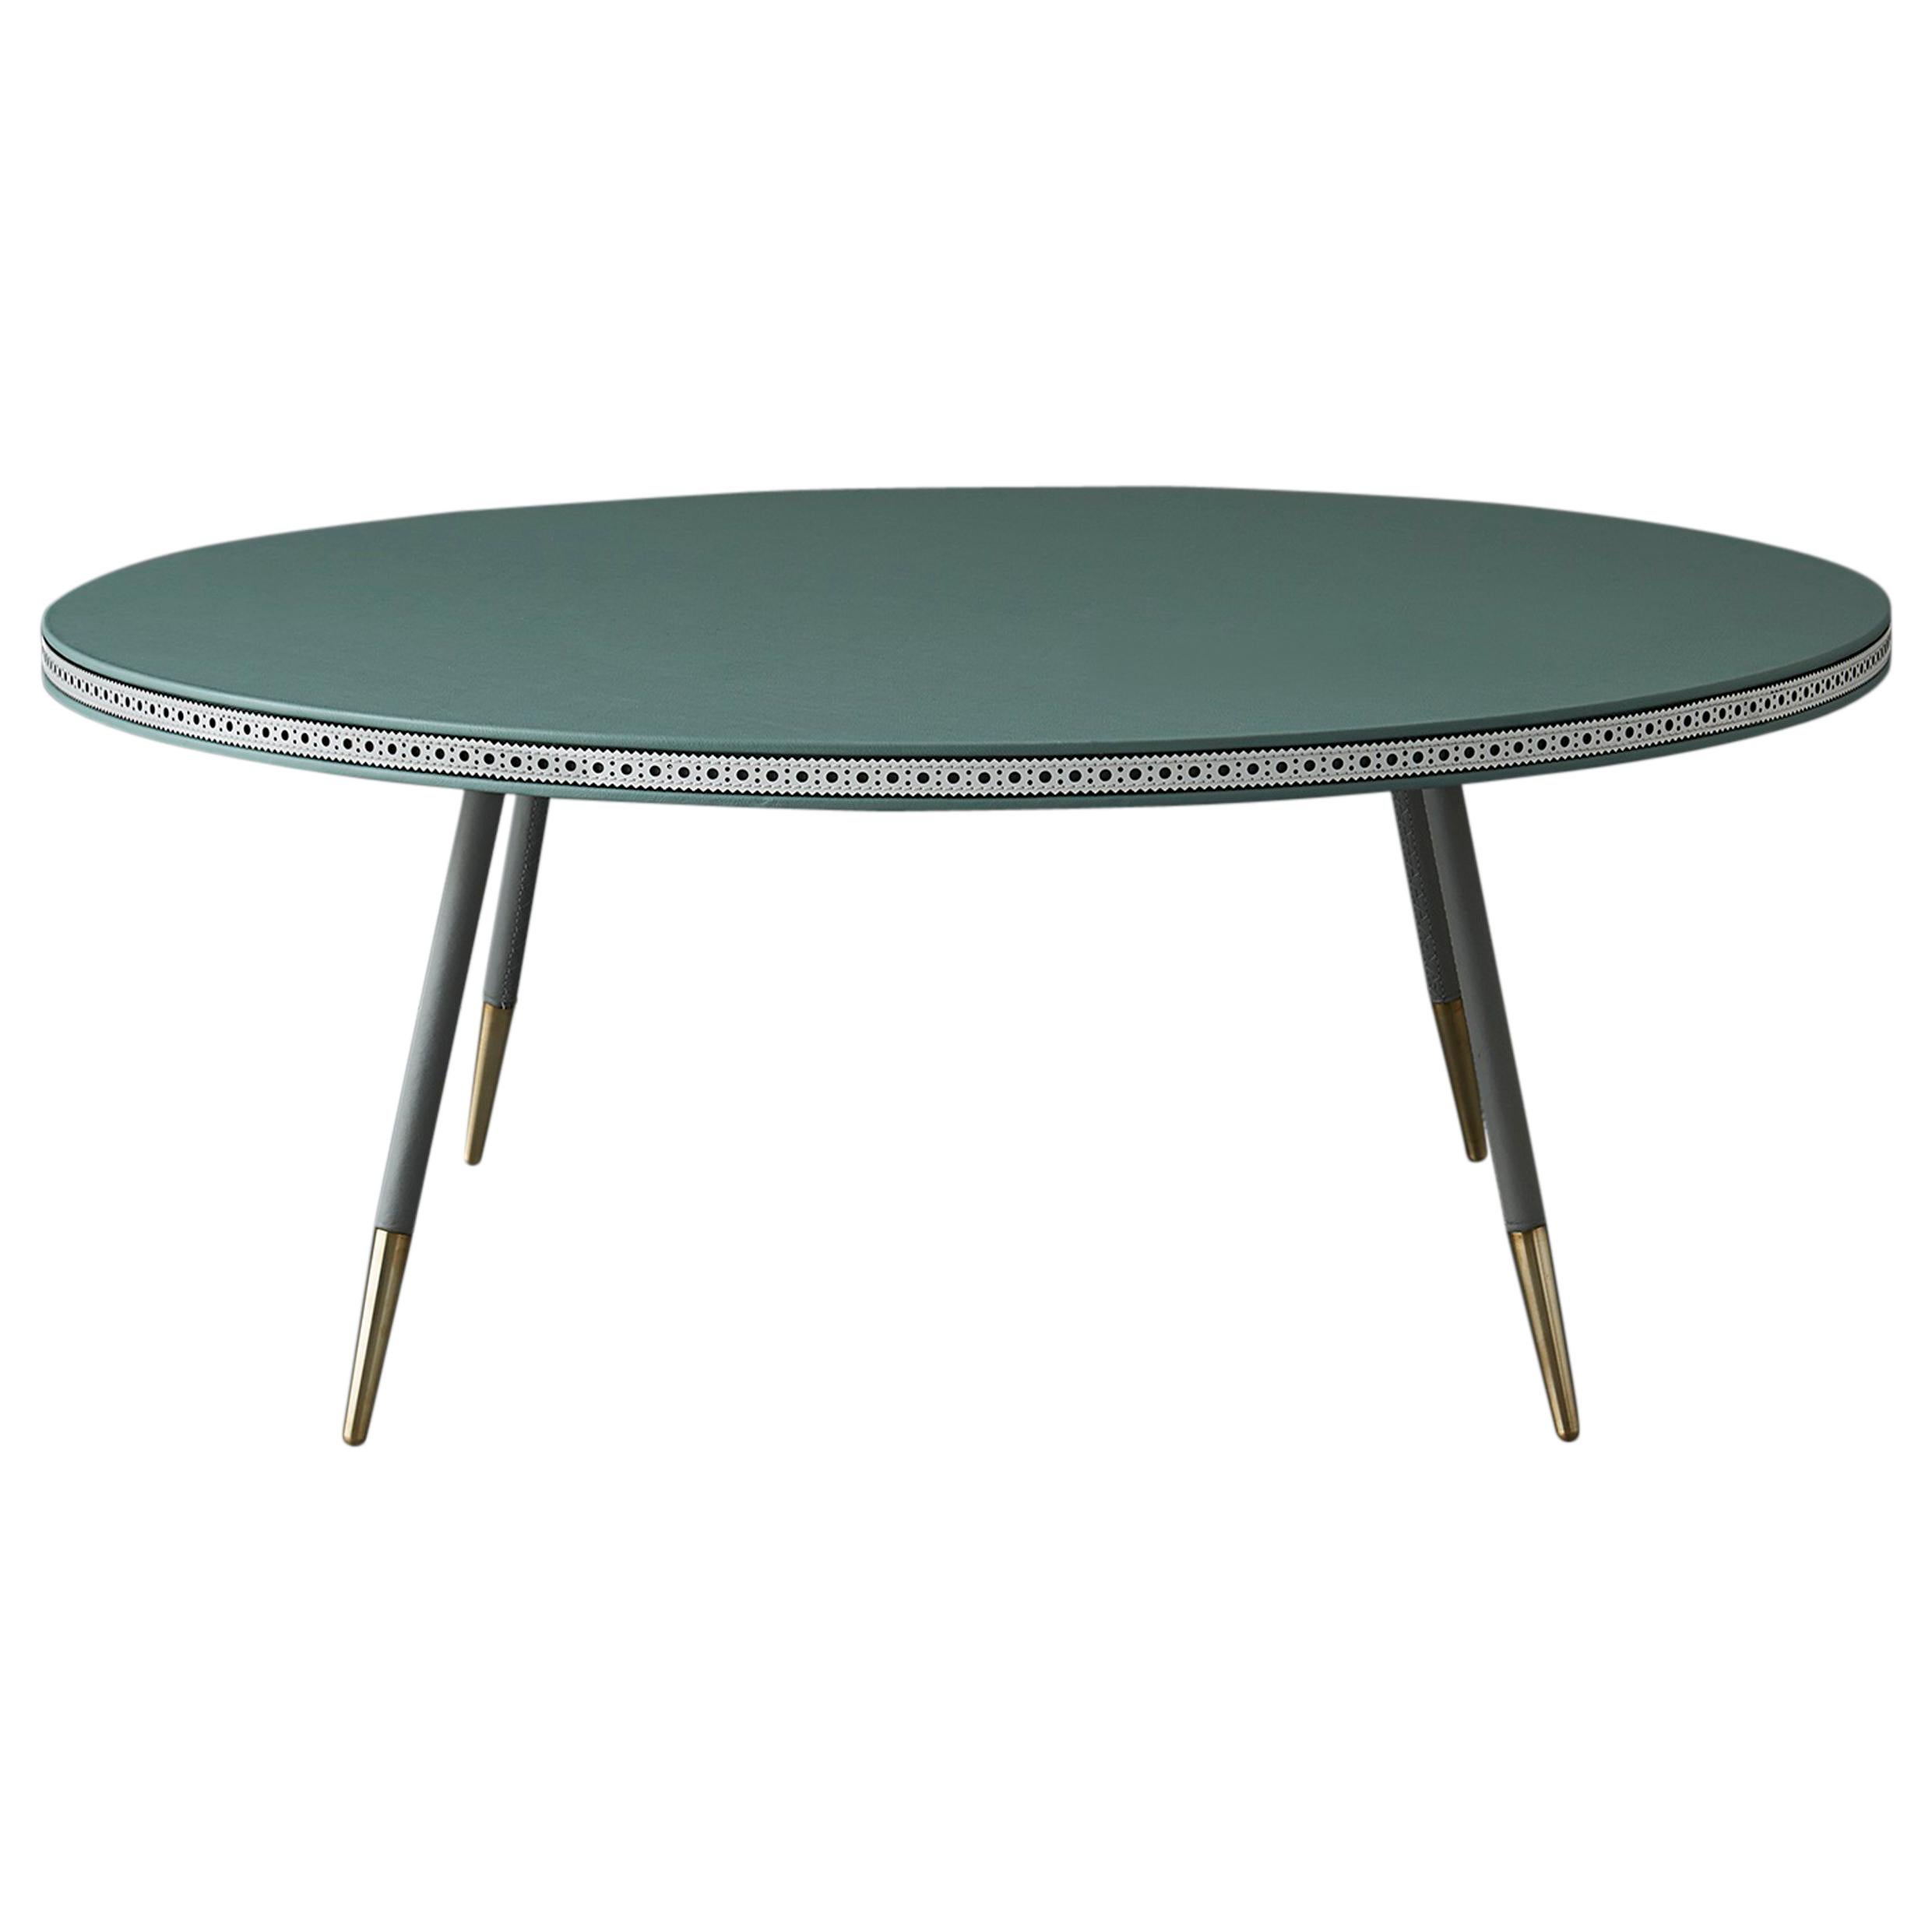 Bethan Gray Leather Brogue Coffee Table in Jade with White Edge and Brass Base 